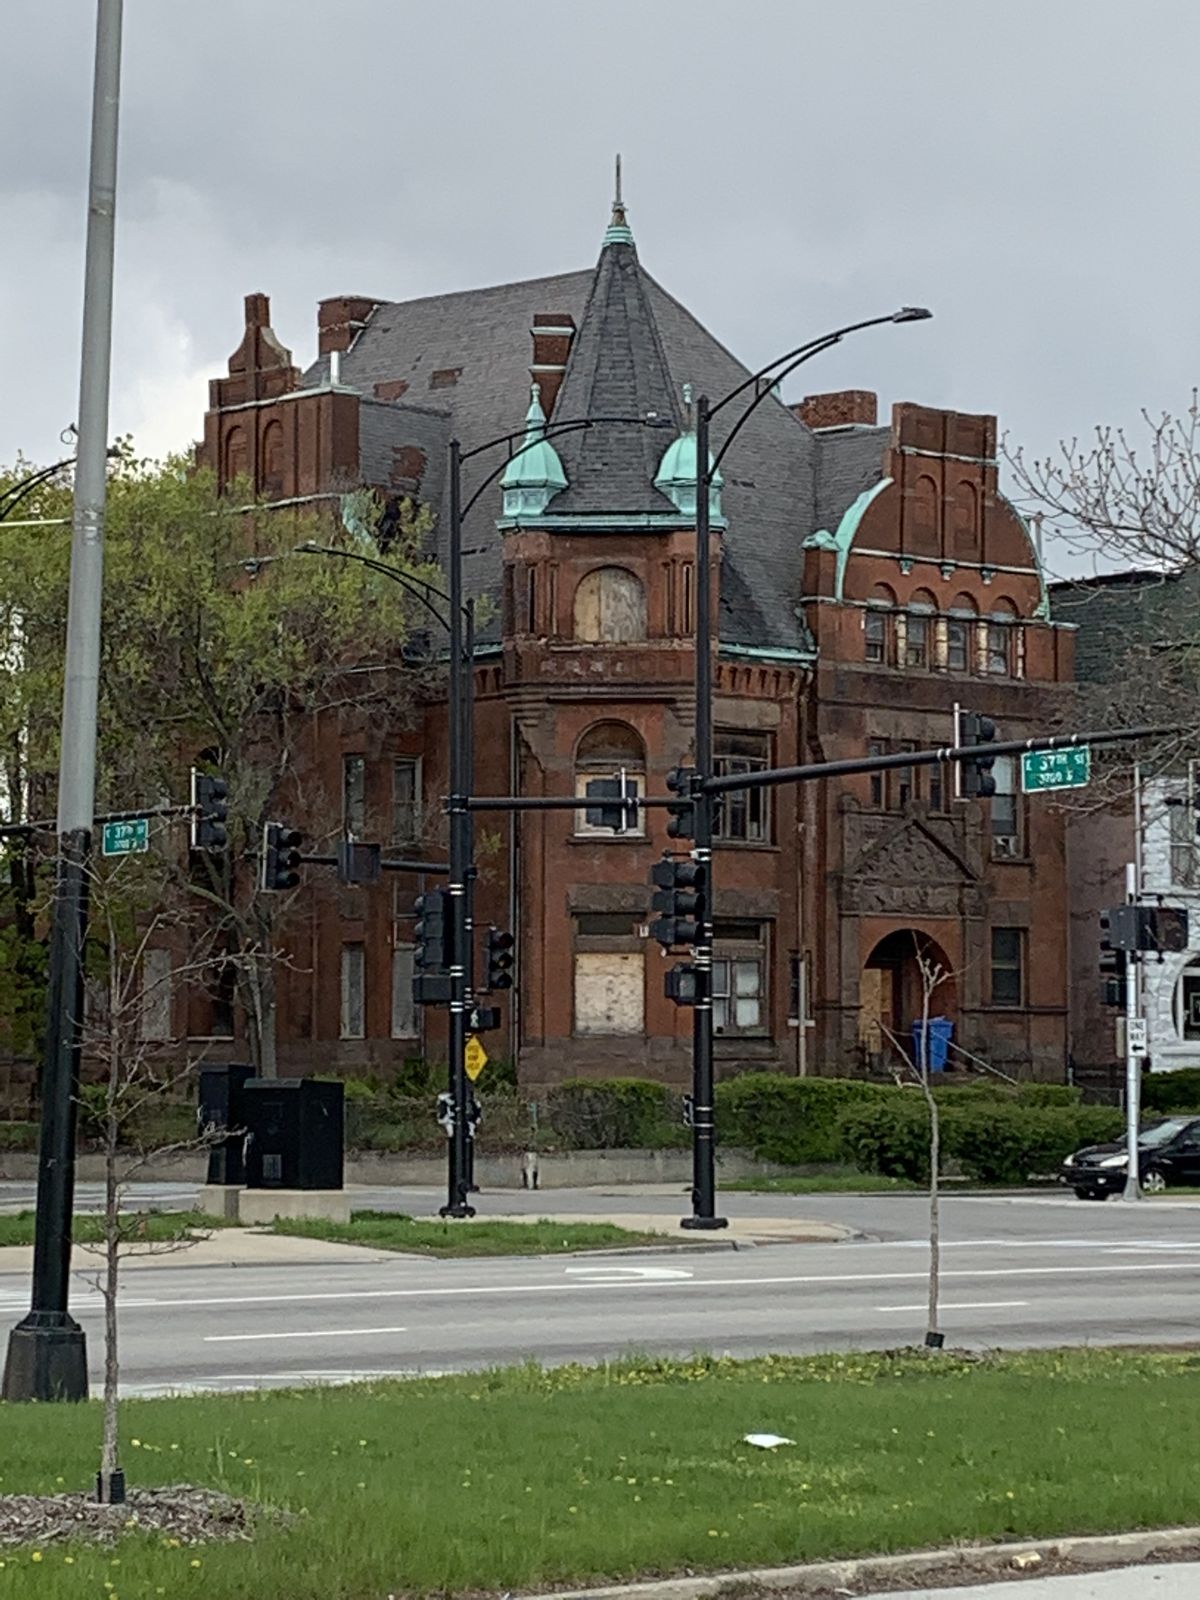 The 133-year-old Lutrelle “Lu” Palmer and Jorja English Palmer Mansion at 3654 S. King Drive was listed on Preservation Chicago’s 2019 “Chicago 7 Most Endangered” list. Purchased by The Obsidian Collection on April 22, the home was originally built in 1888 for Justice D. Harry Hammer, then bought in 1976 by the renowned community organizers.